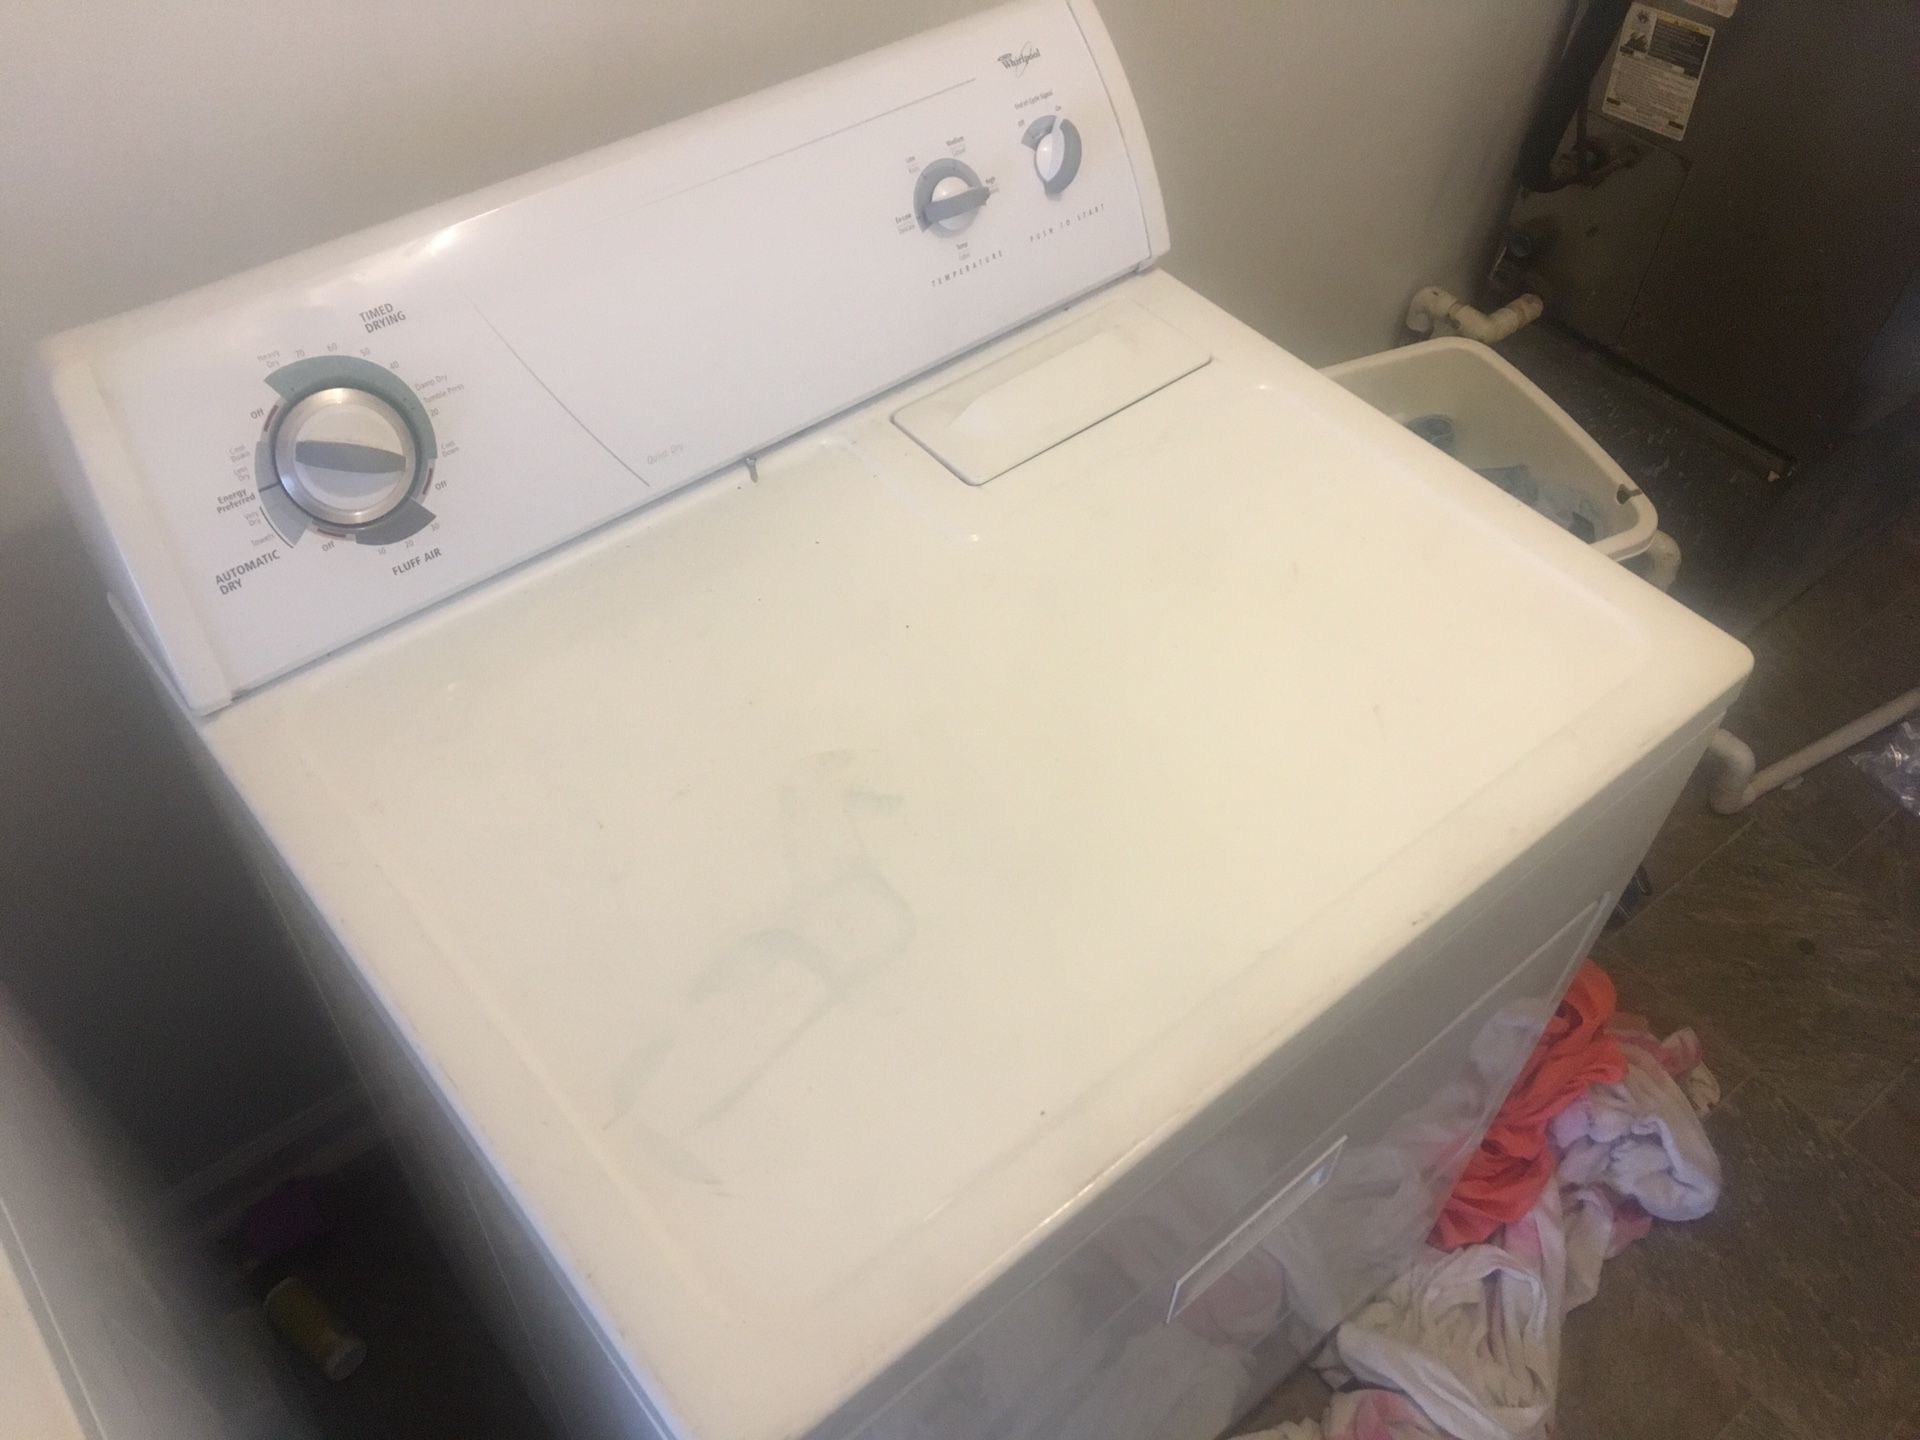 Electric washer and dryer matching whirlpool set